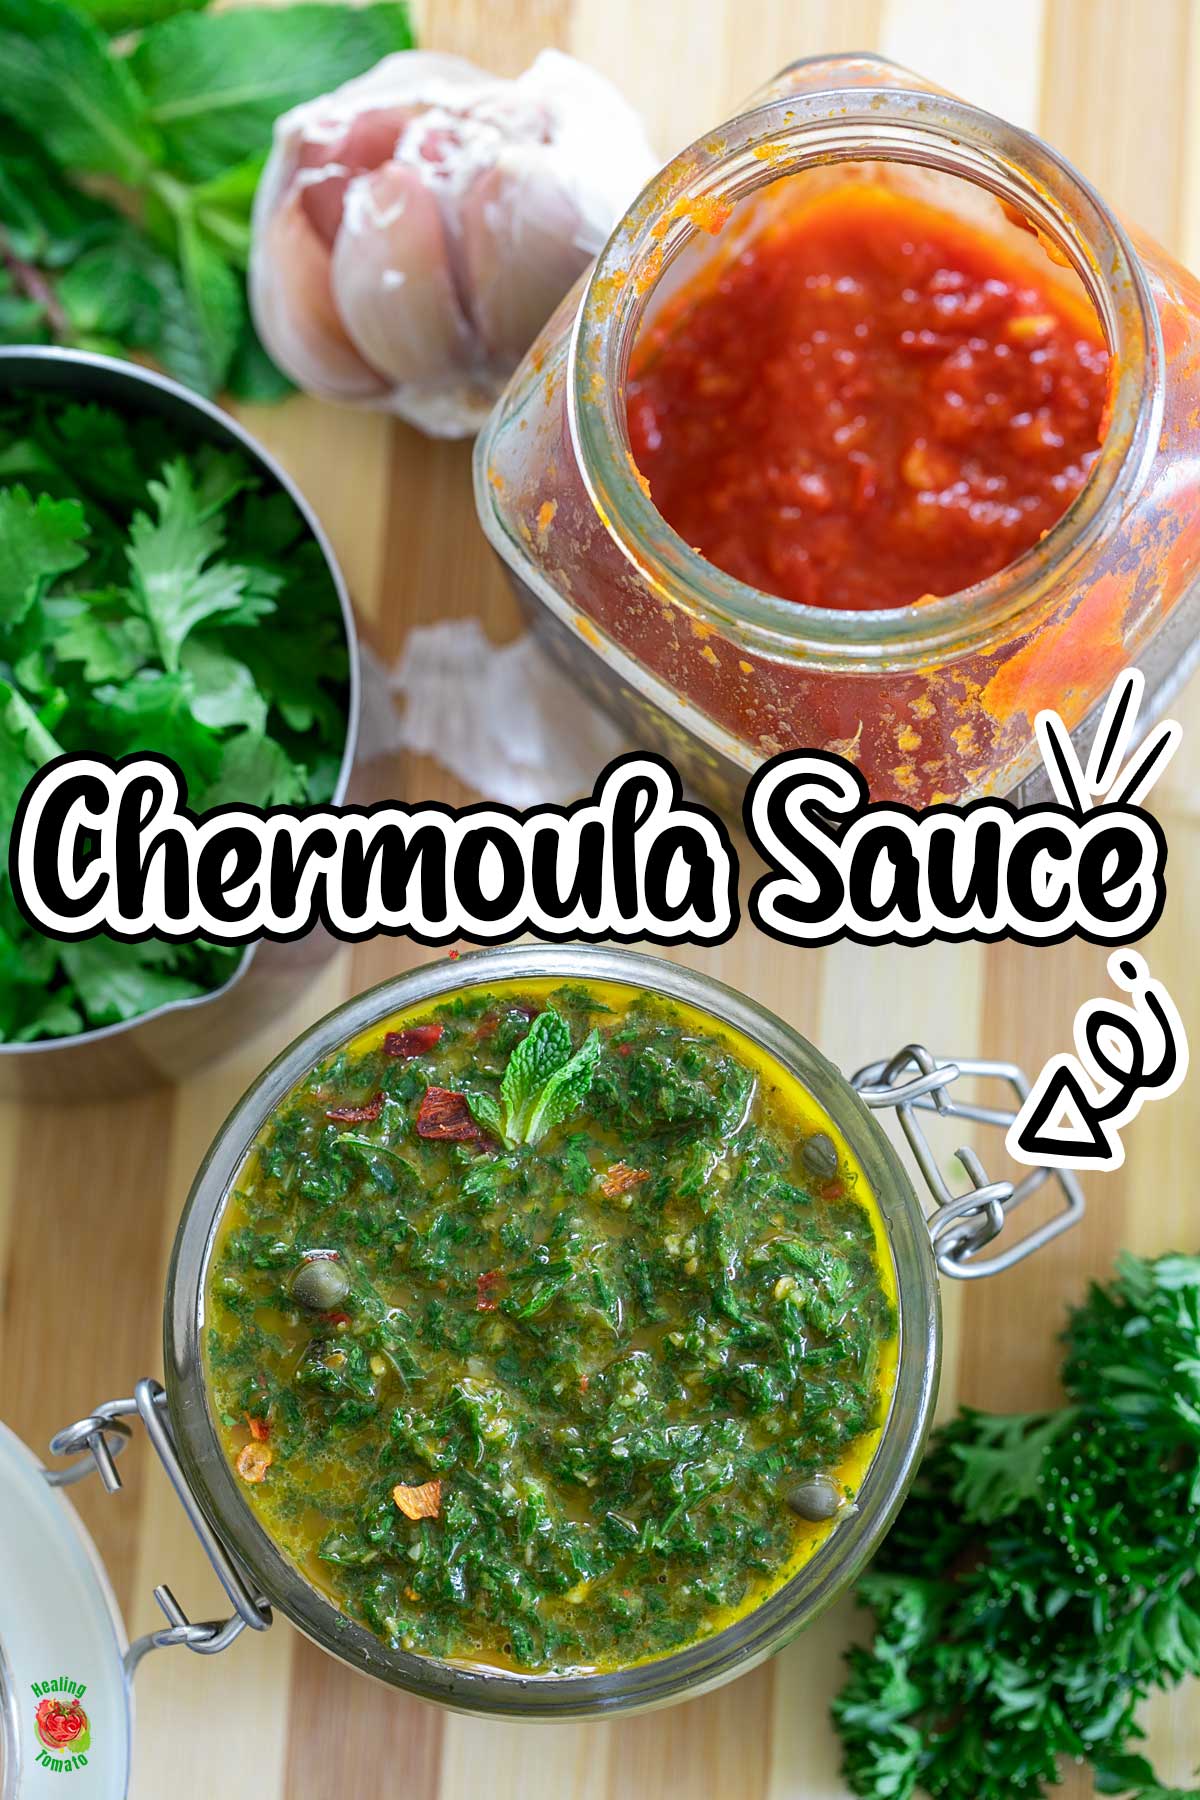 Top and closeup view of chermoula sauce in a glass jar. Jar is surrounded by fresh herbs, garlic and harissa paste.